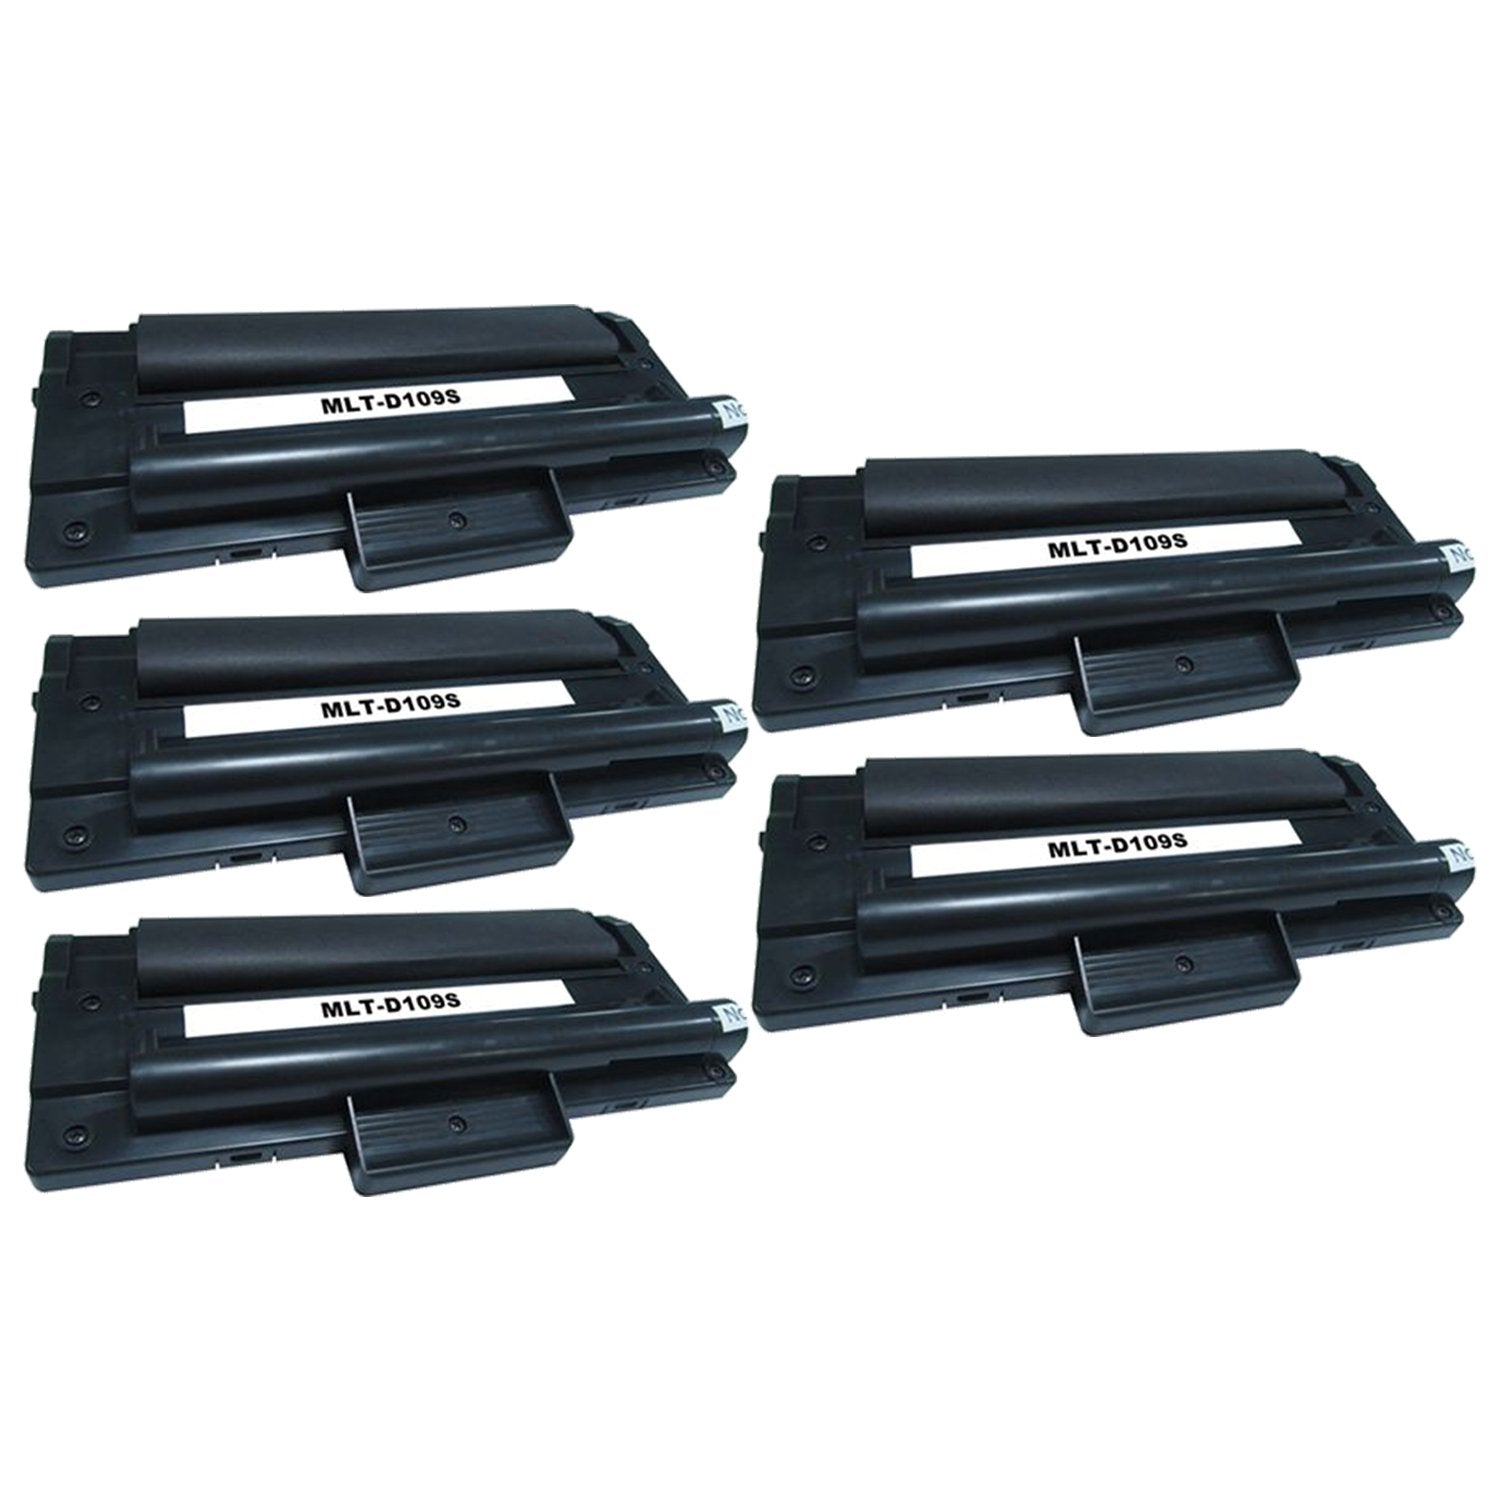 Absolute Toner Compatible Samsung MLT-D109S Black Toner Cartridge | Absolute Toner Samsung Toner Cartridges